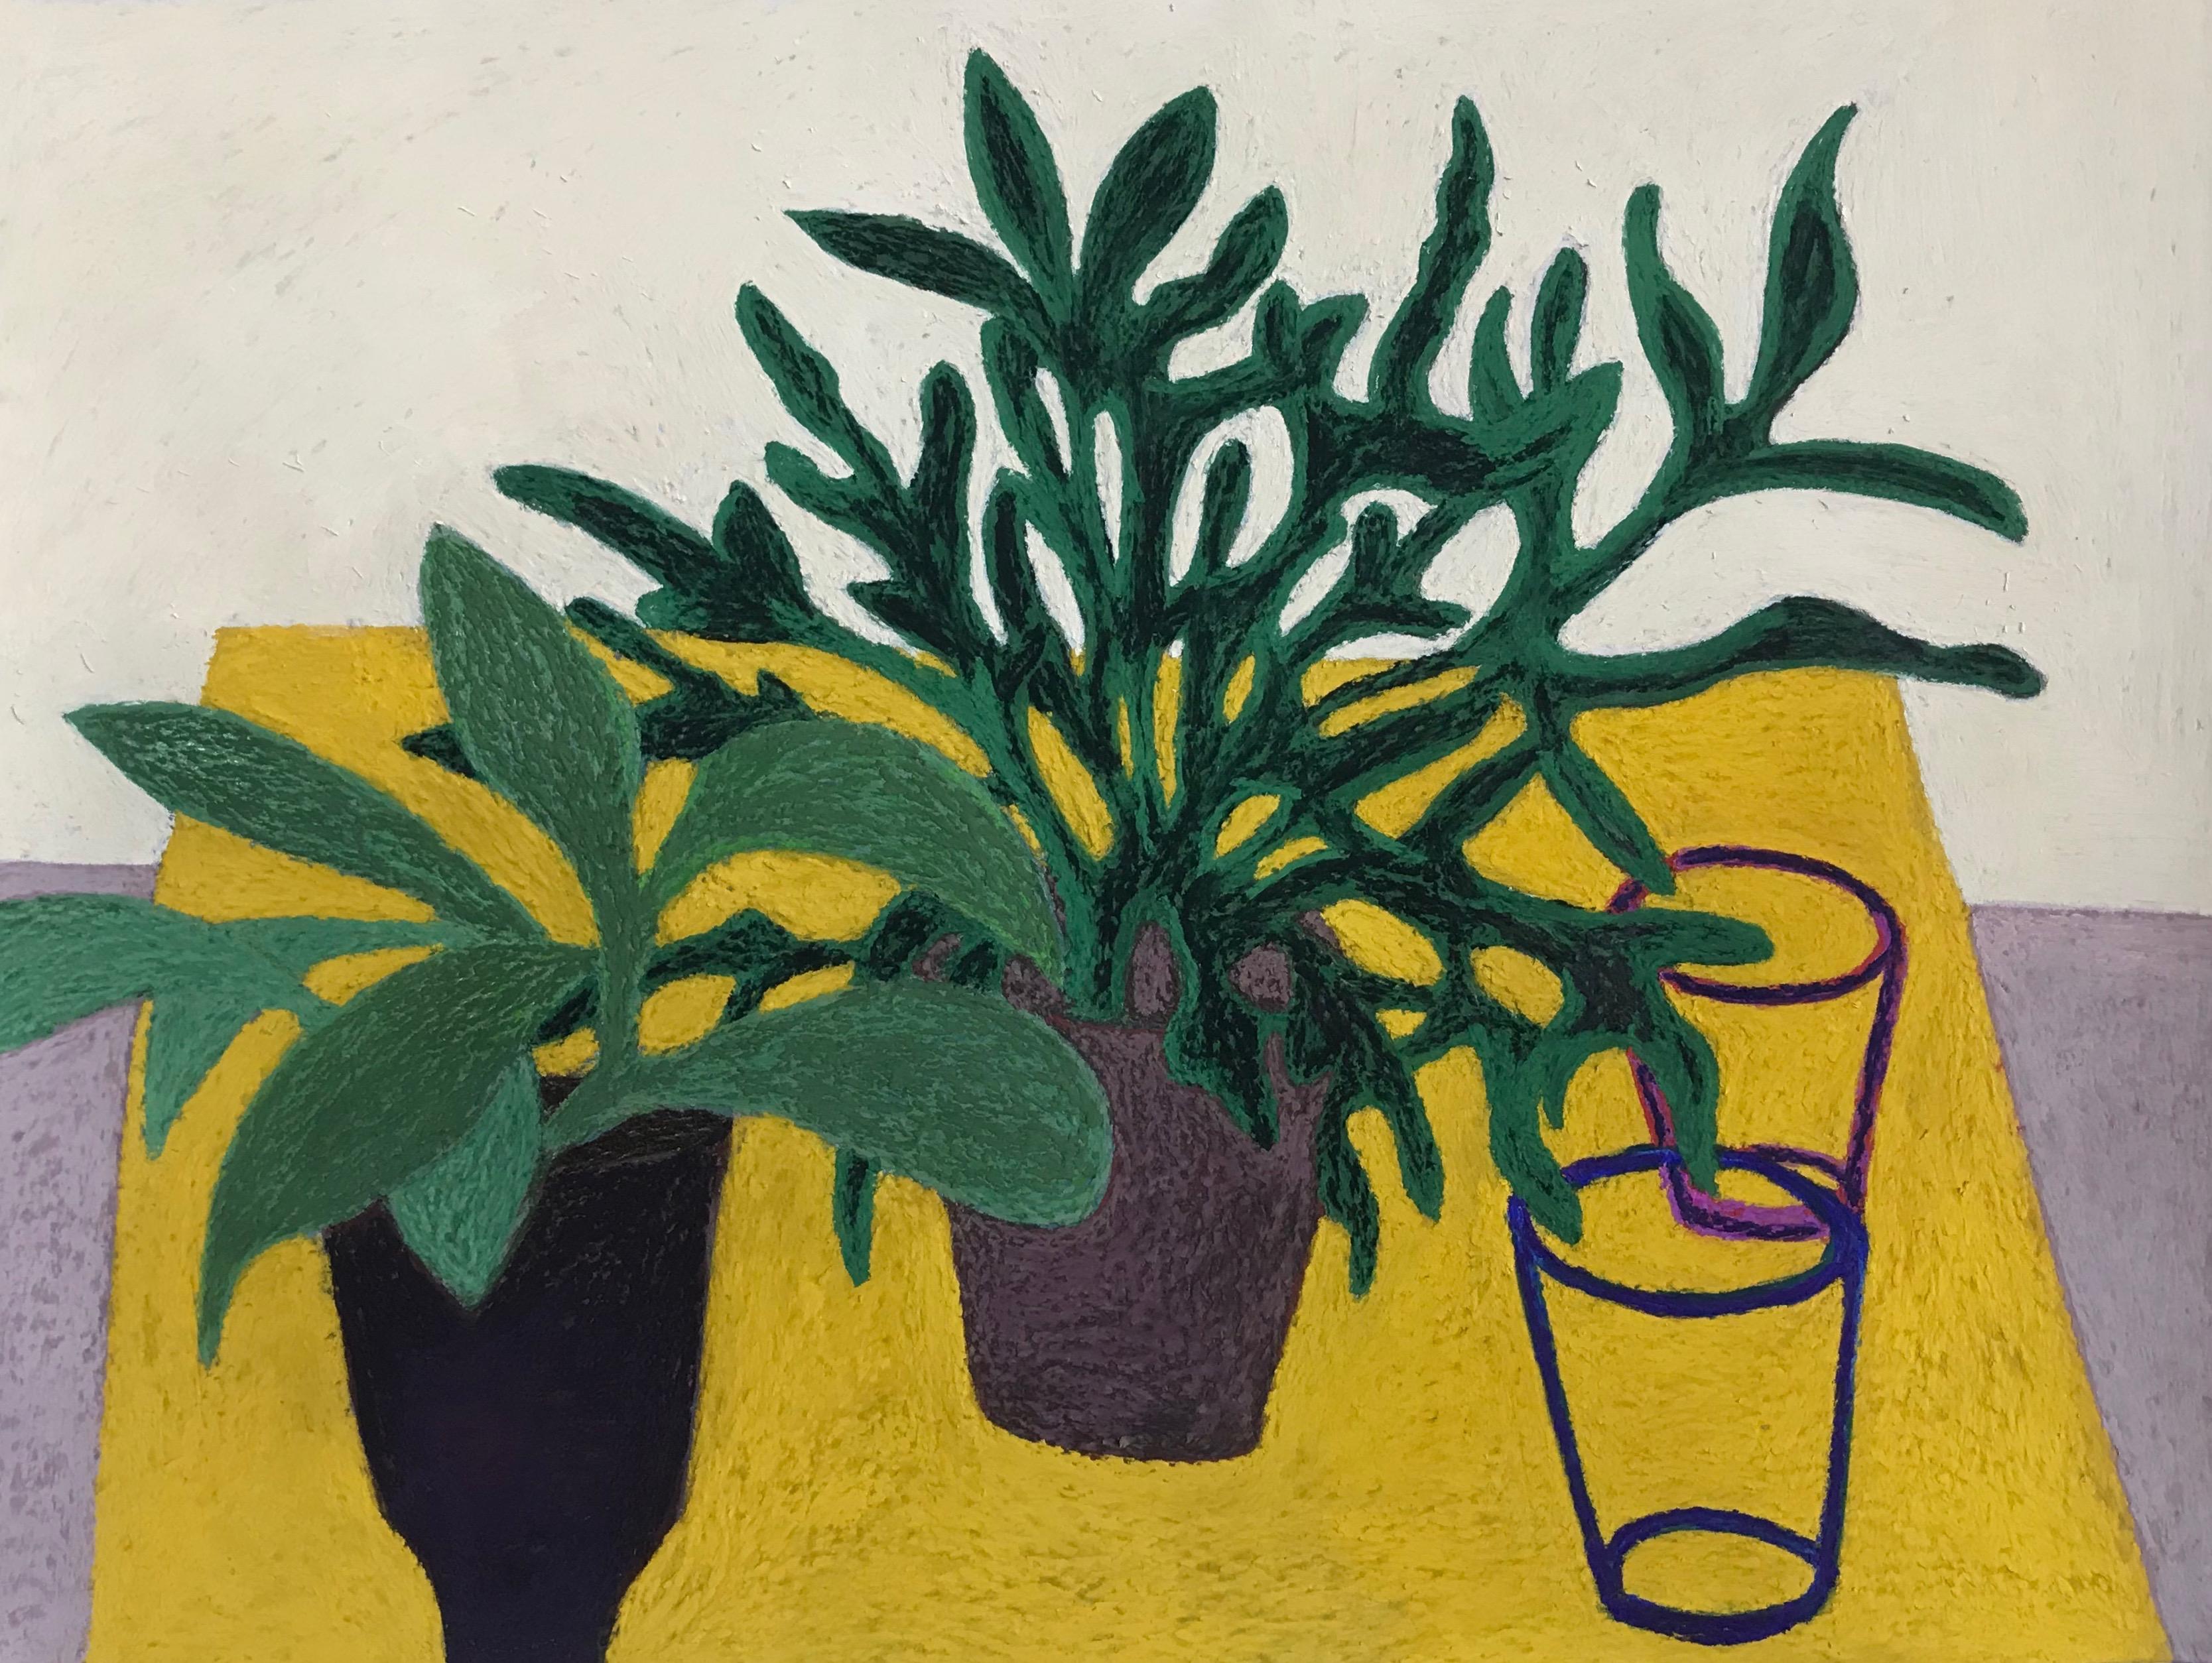 Green Days, interior still life with plants, green and yellow